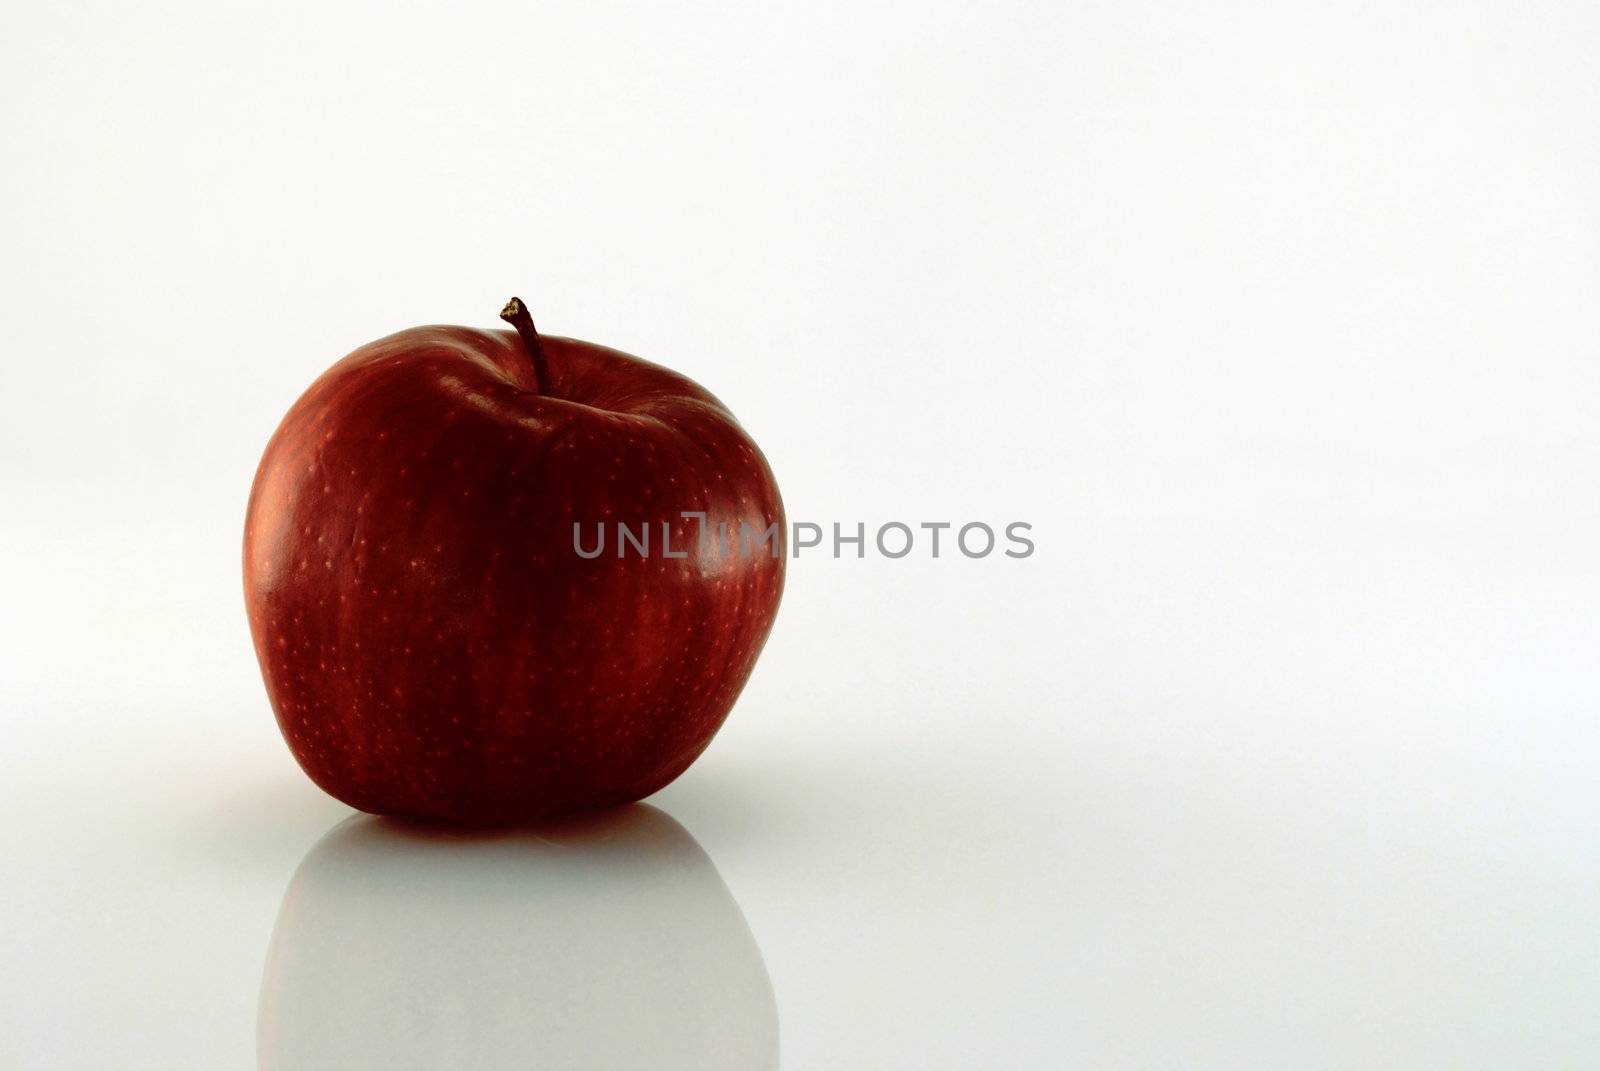 Red apple on reflective background against white with copy space